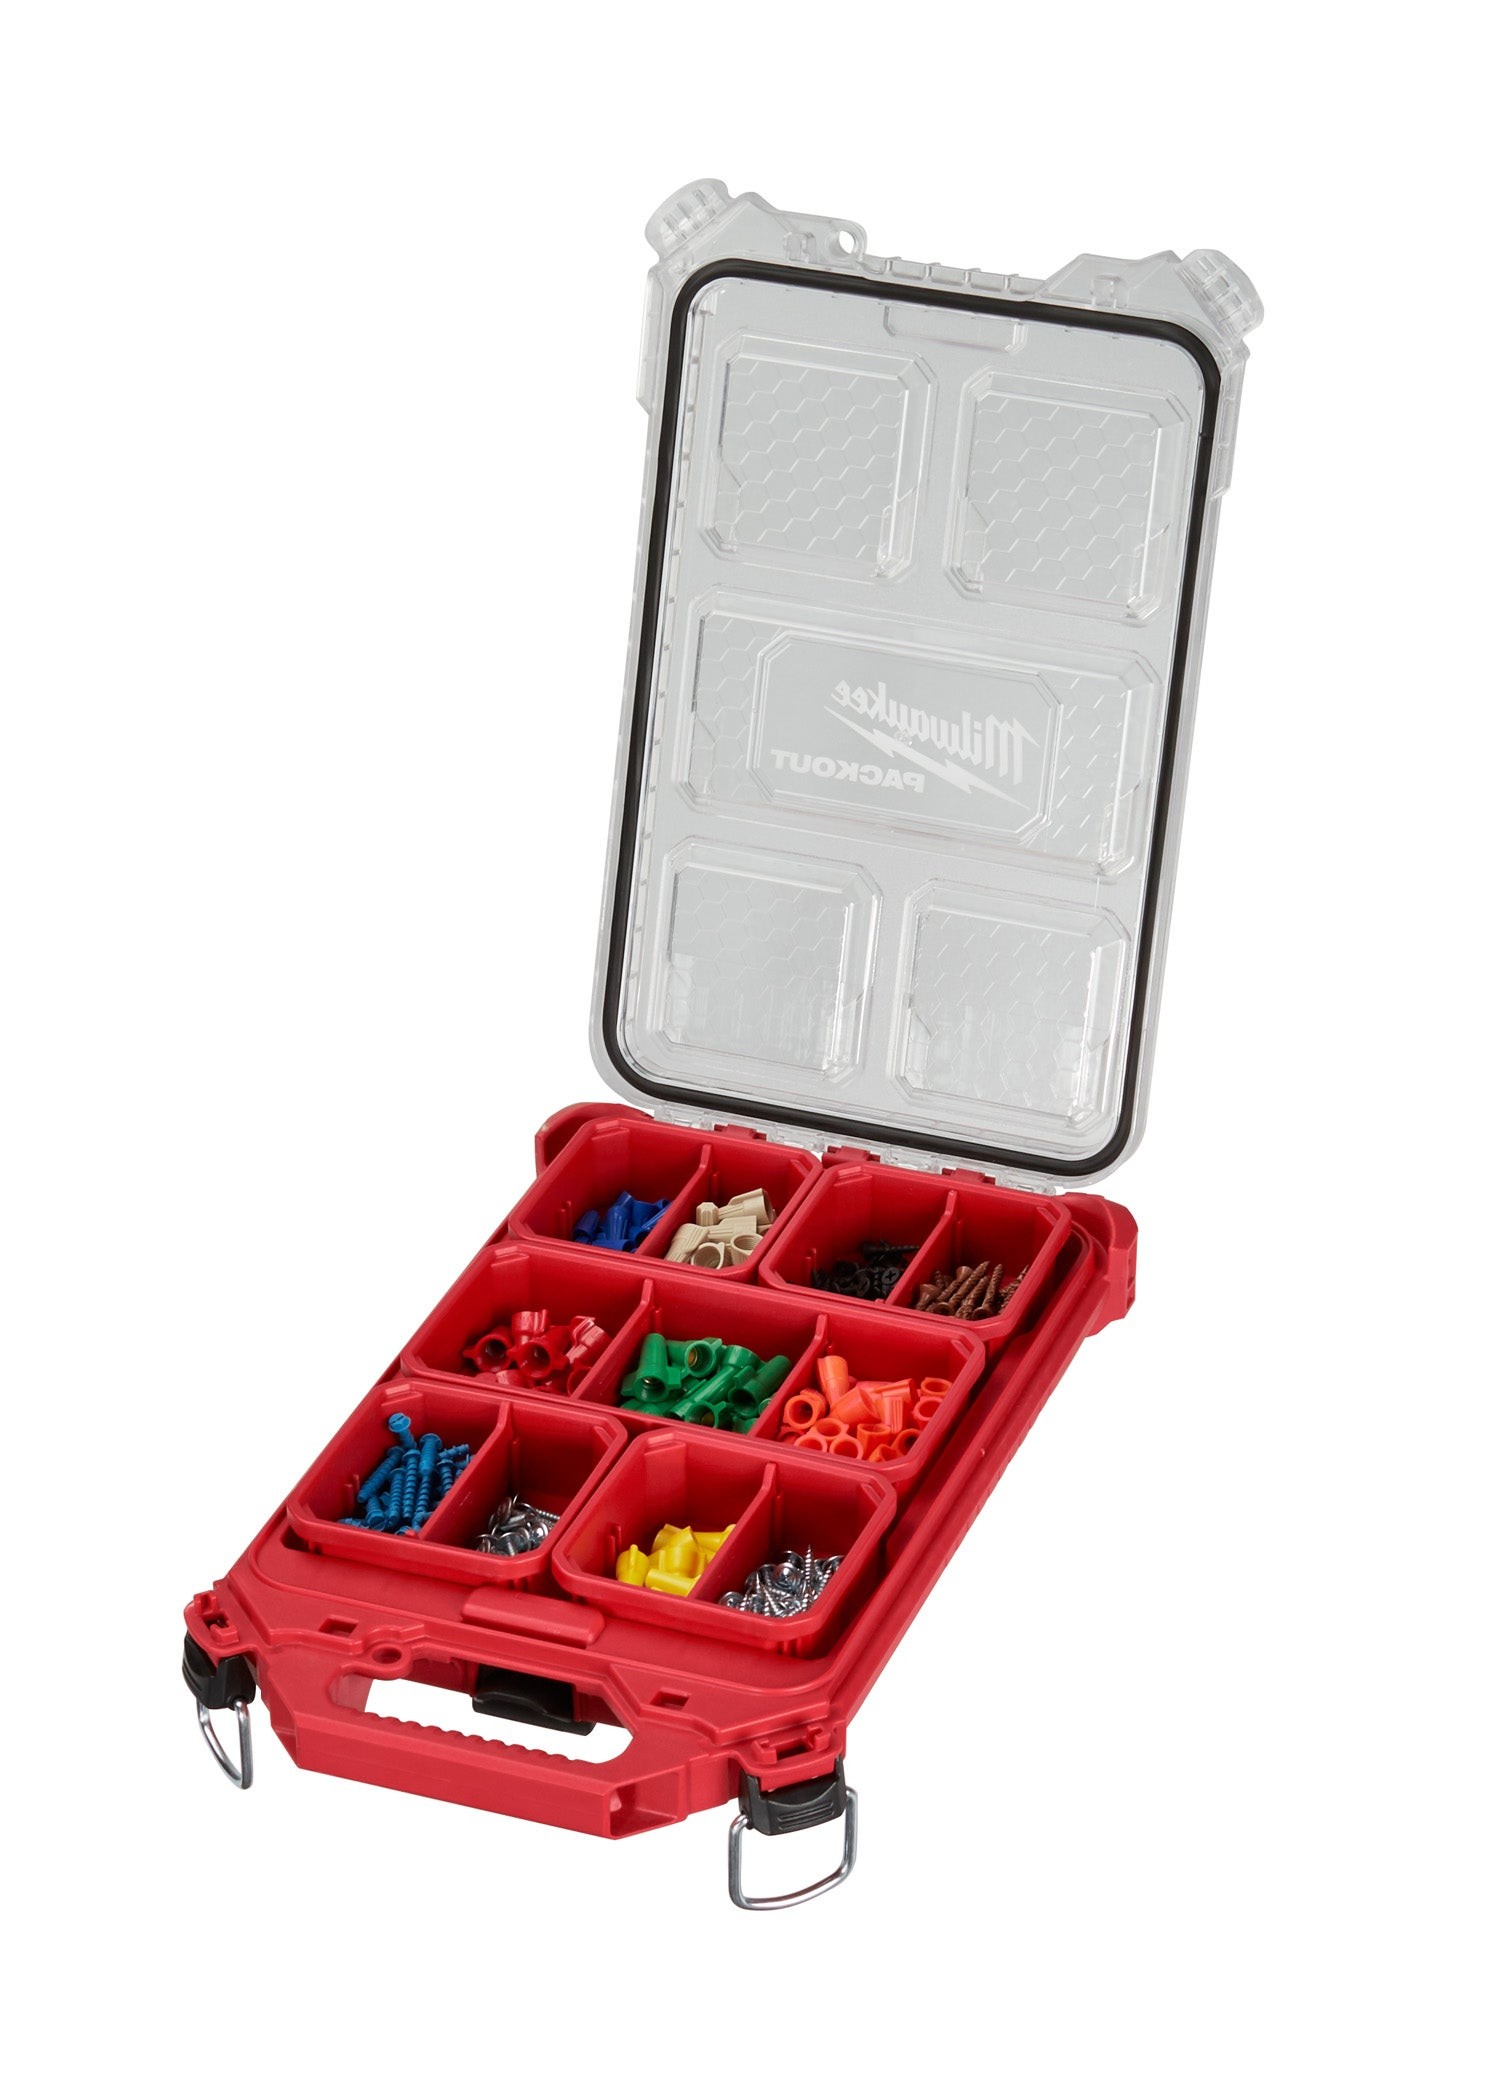 PACKOUT Compact Low-Profile Organizer